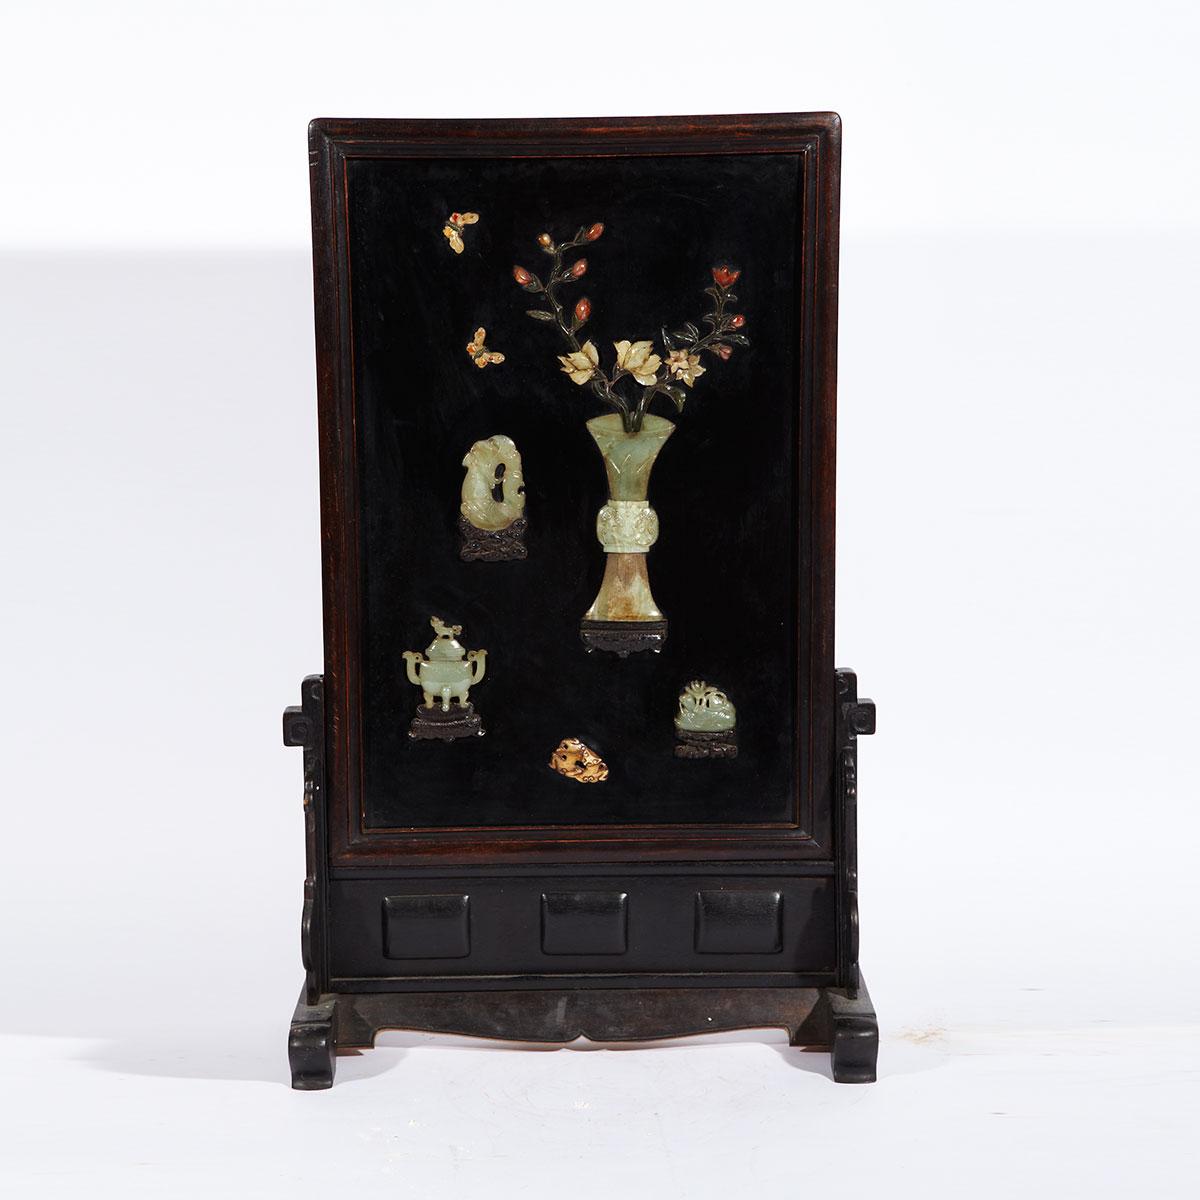 Jade and Hardstone Lacquered Table Screen, Republican Period 